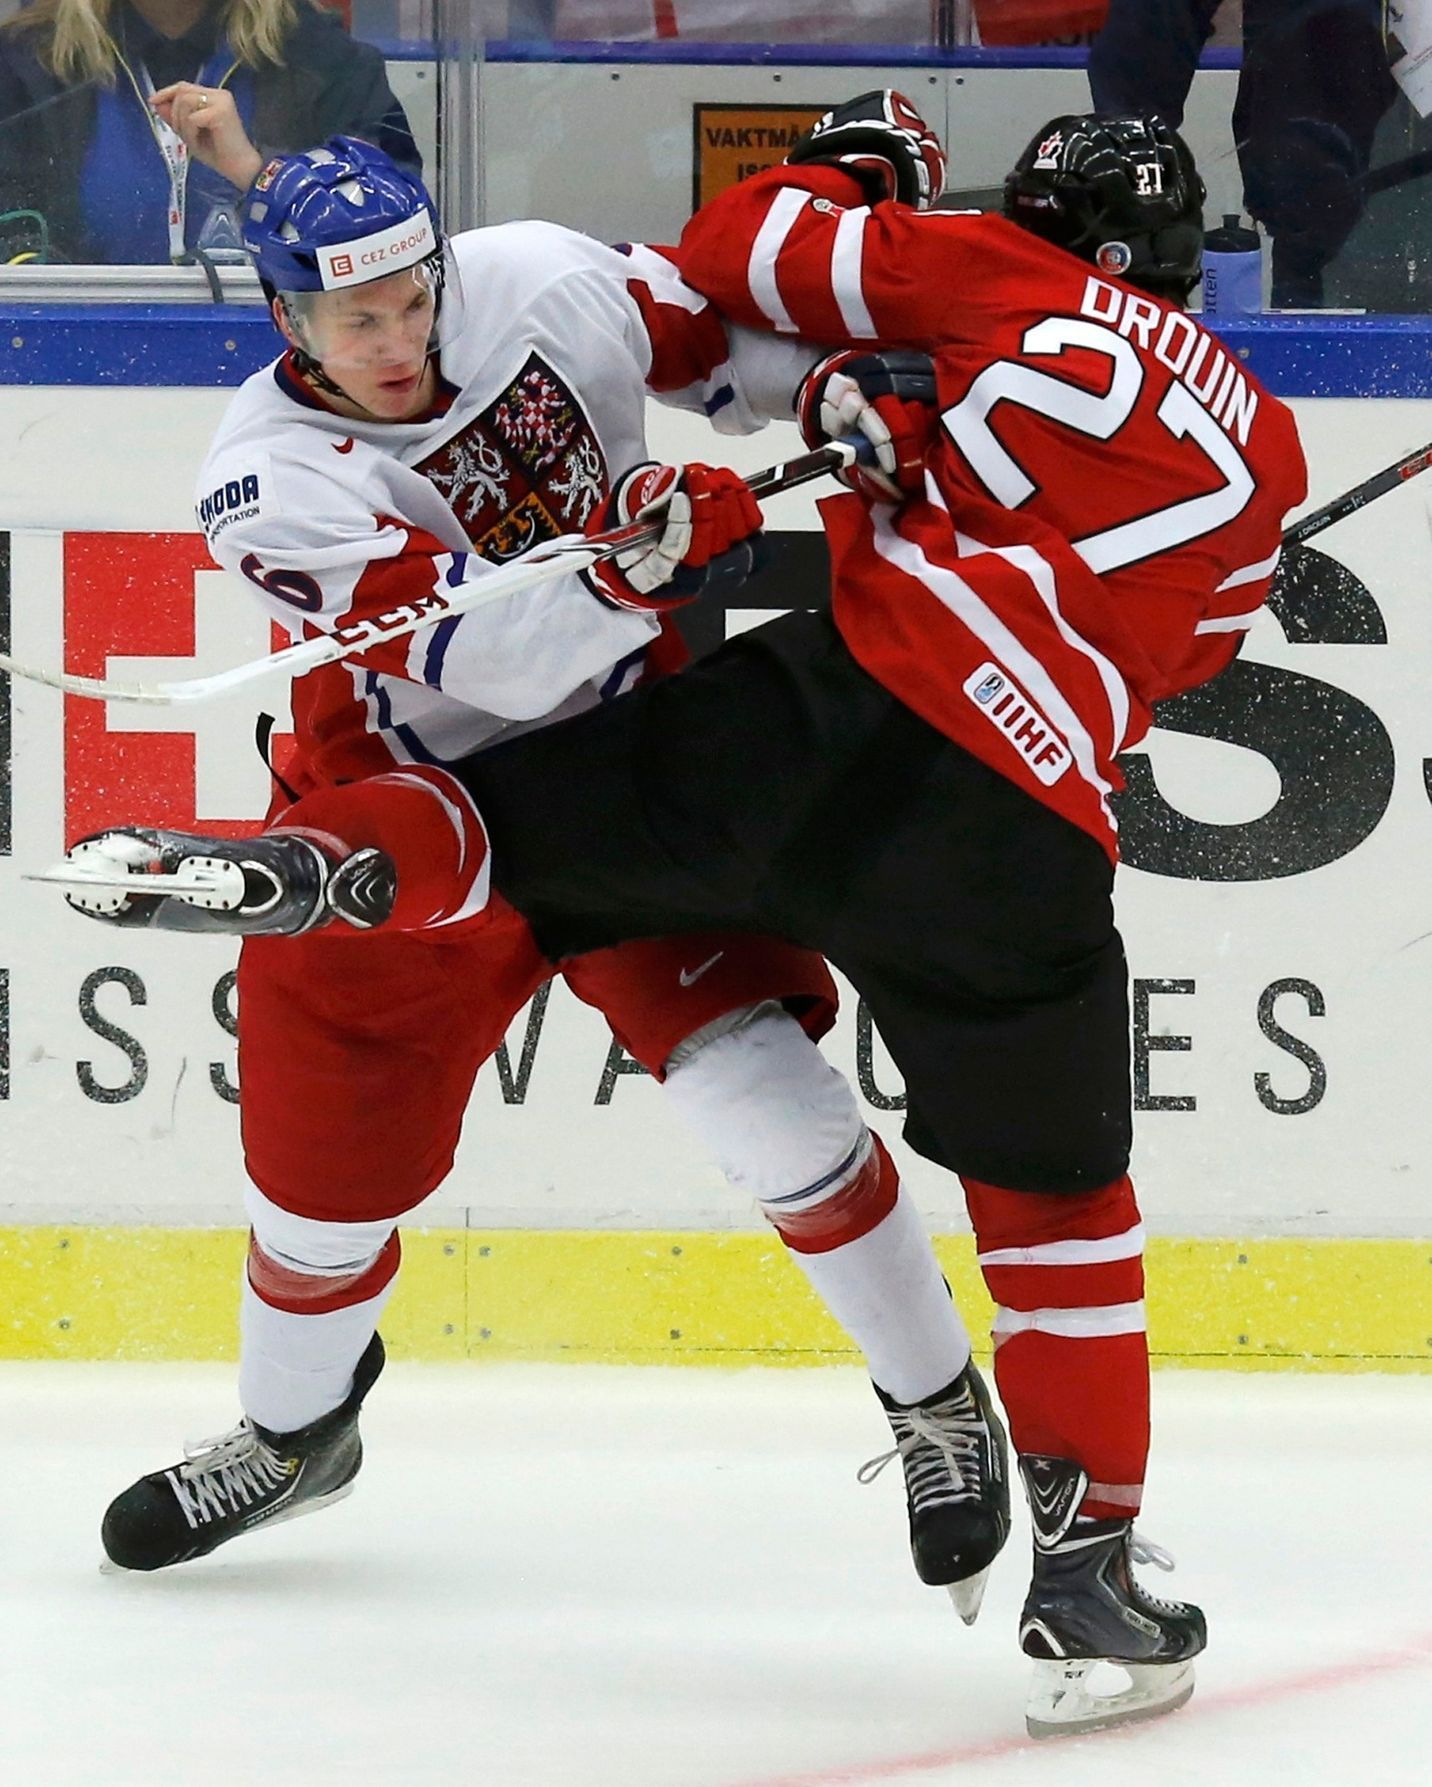 Czech Republic's Knot checks Canada's Drouin during the second period of their IIHF World Junior Championship ice hockey game in Malmo